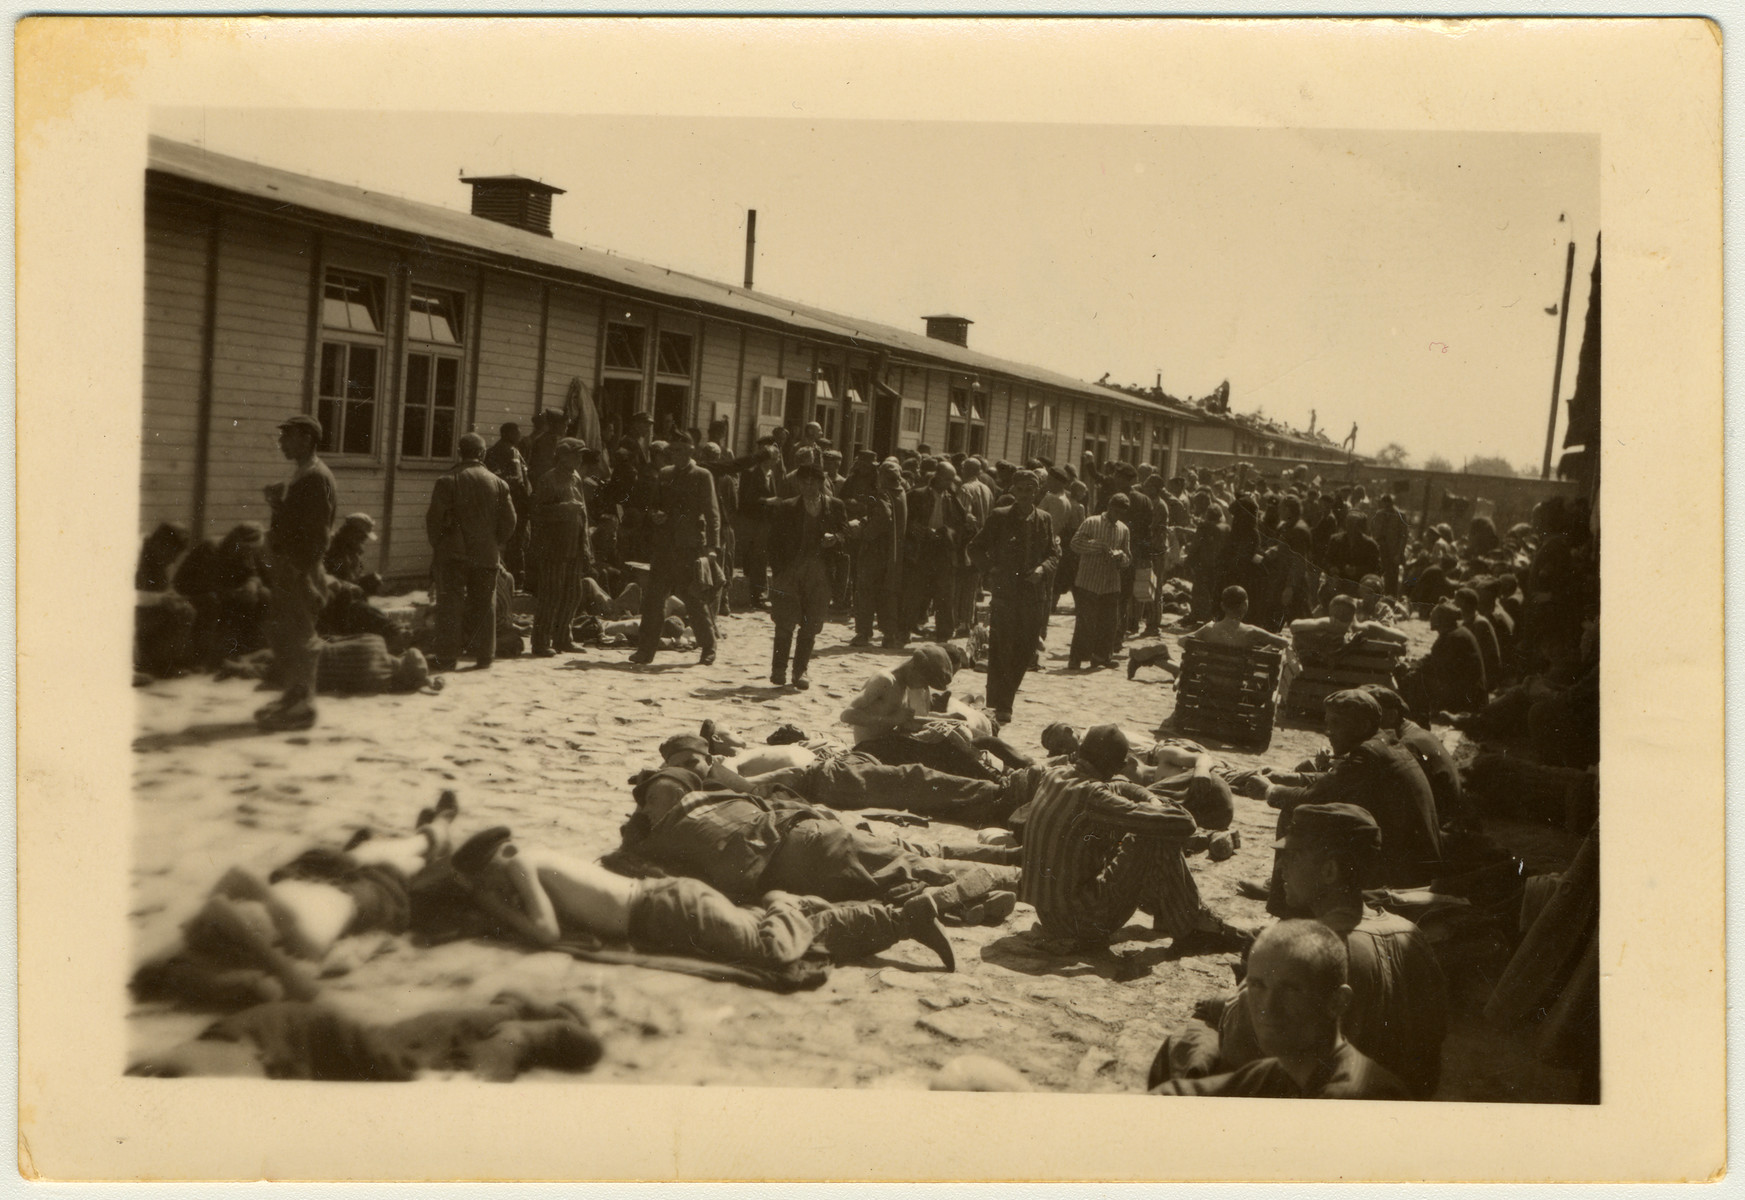 Survivors gather outside a barrack of the Mauthausen concentration camp after liberation.